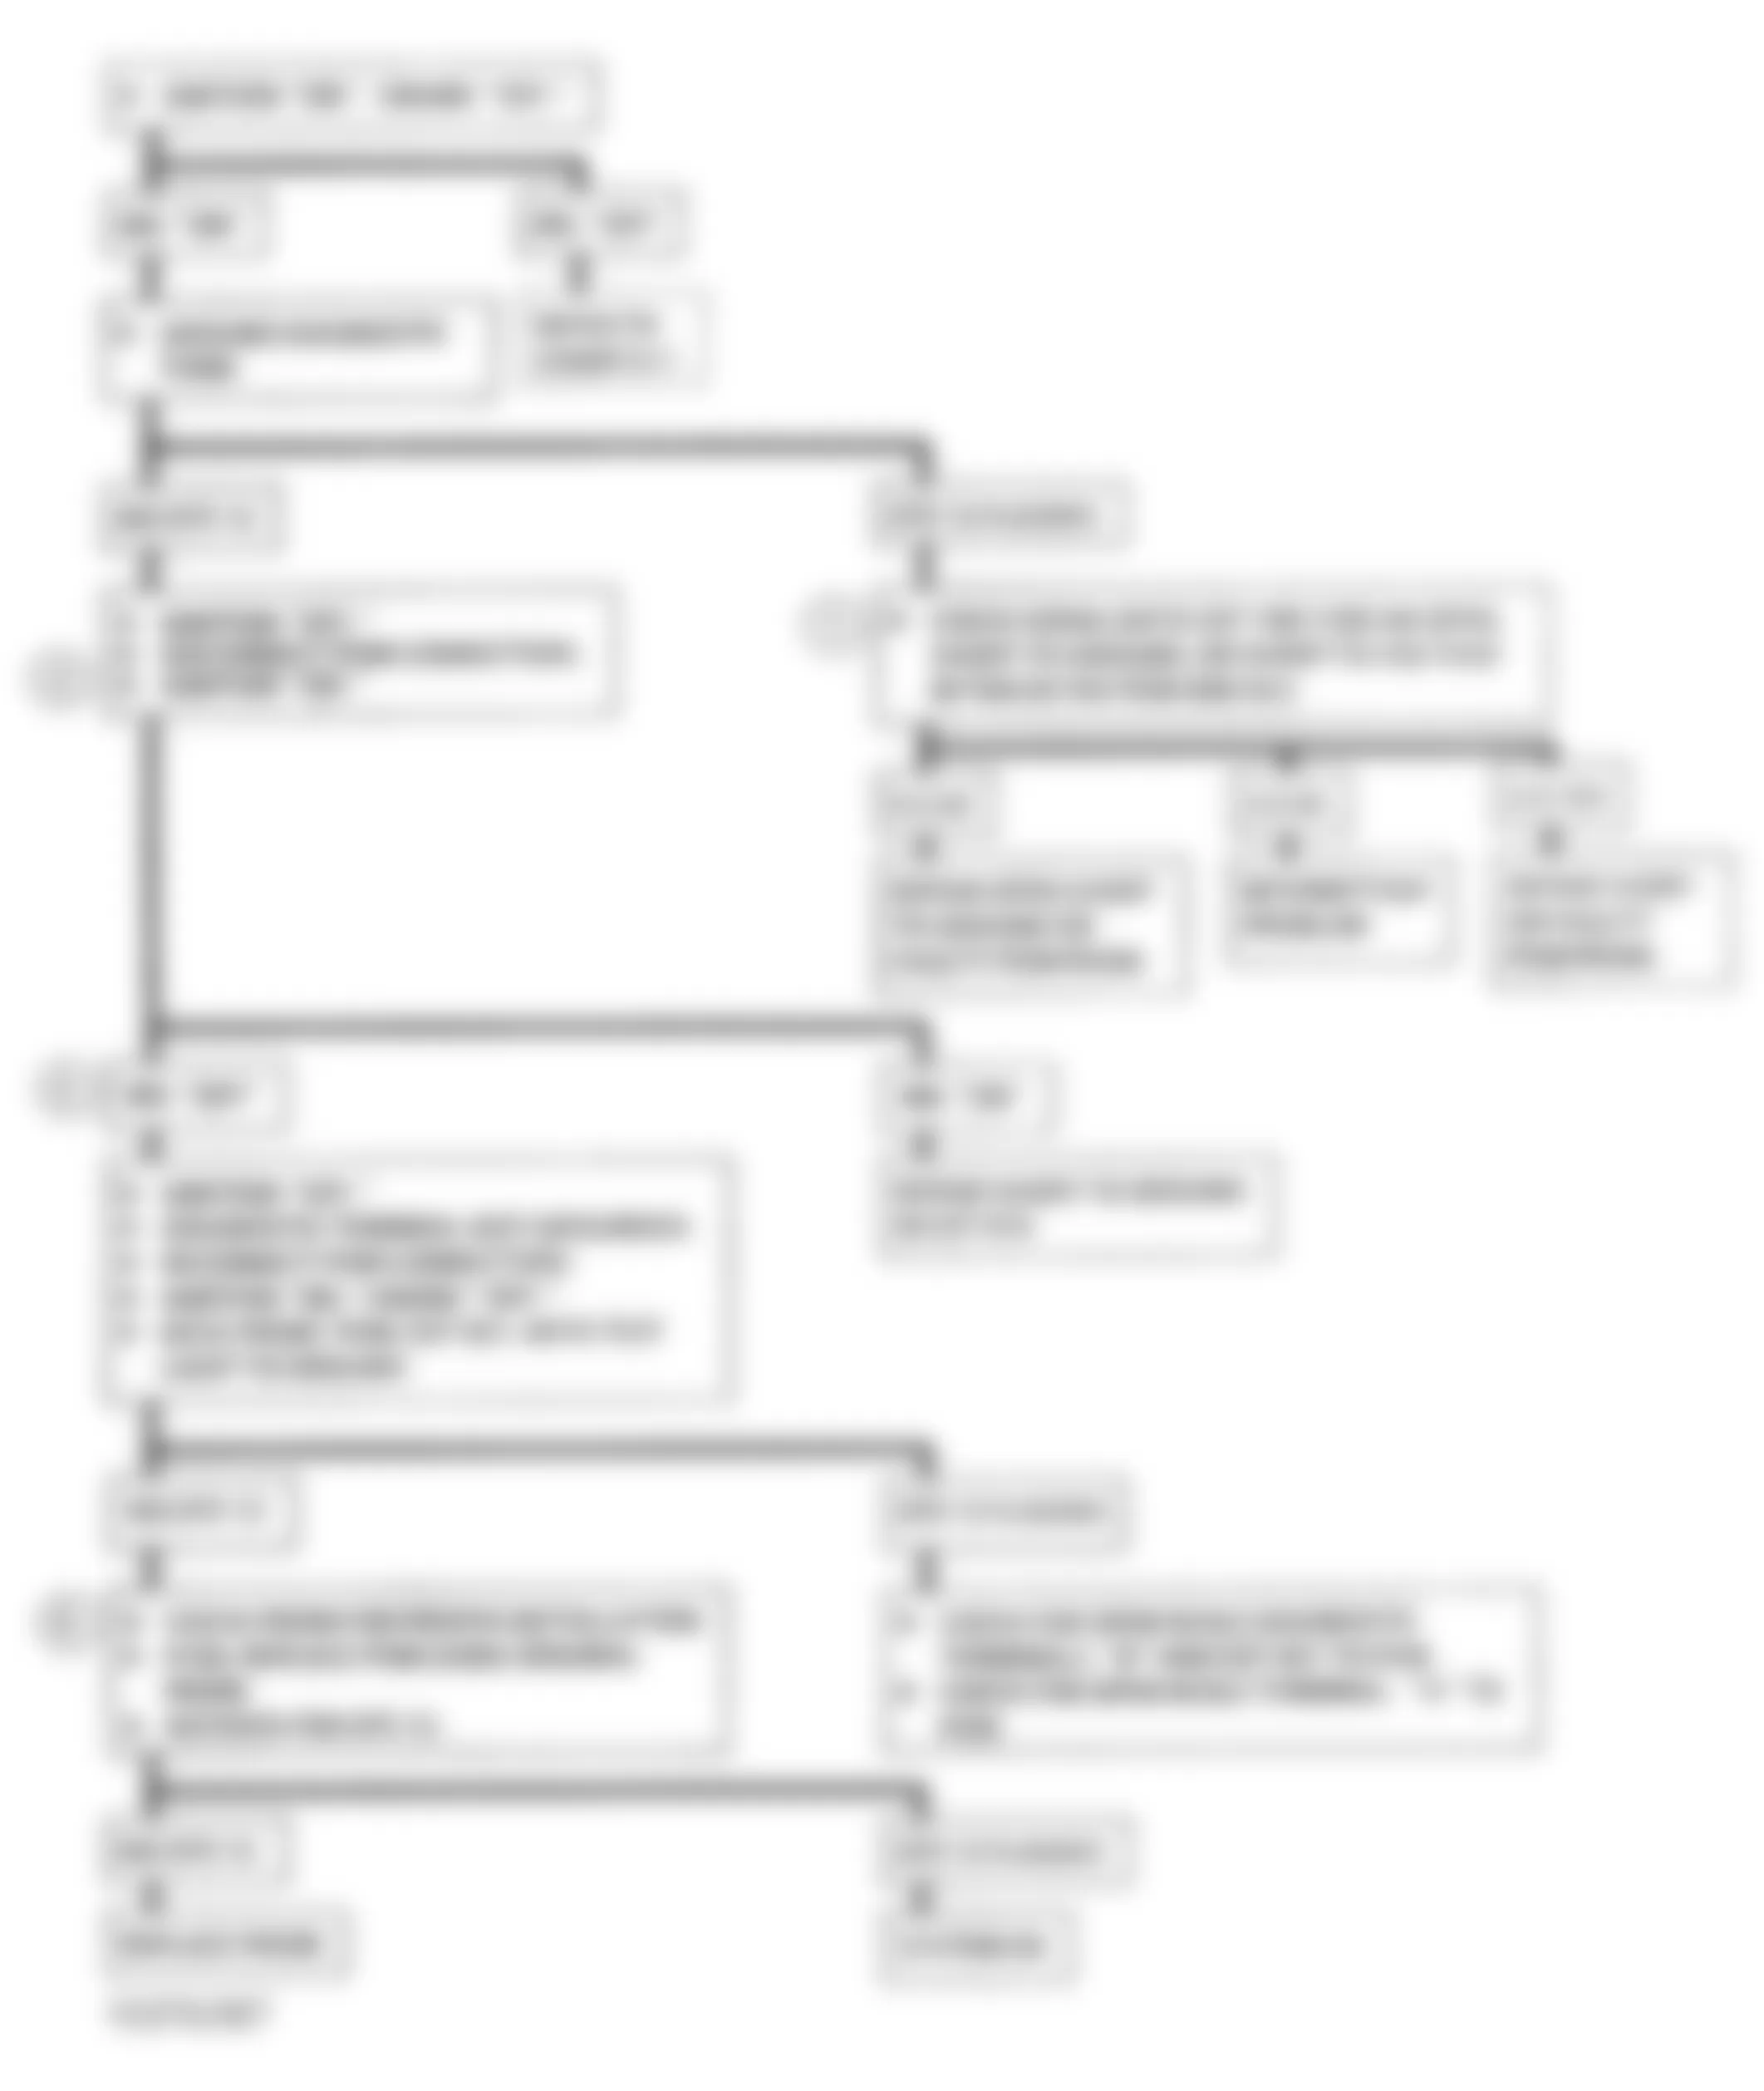 Chevrolet Chevy Van G30 1993 - Component Locations -  A-2, Flowchart, No DLC Data, MIL On All Time - A/T